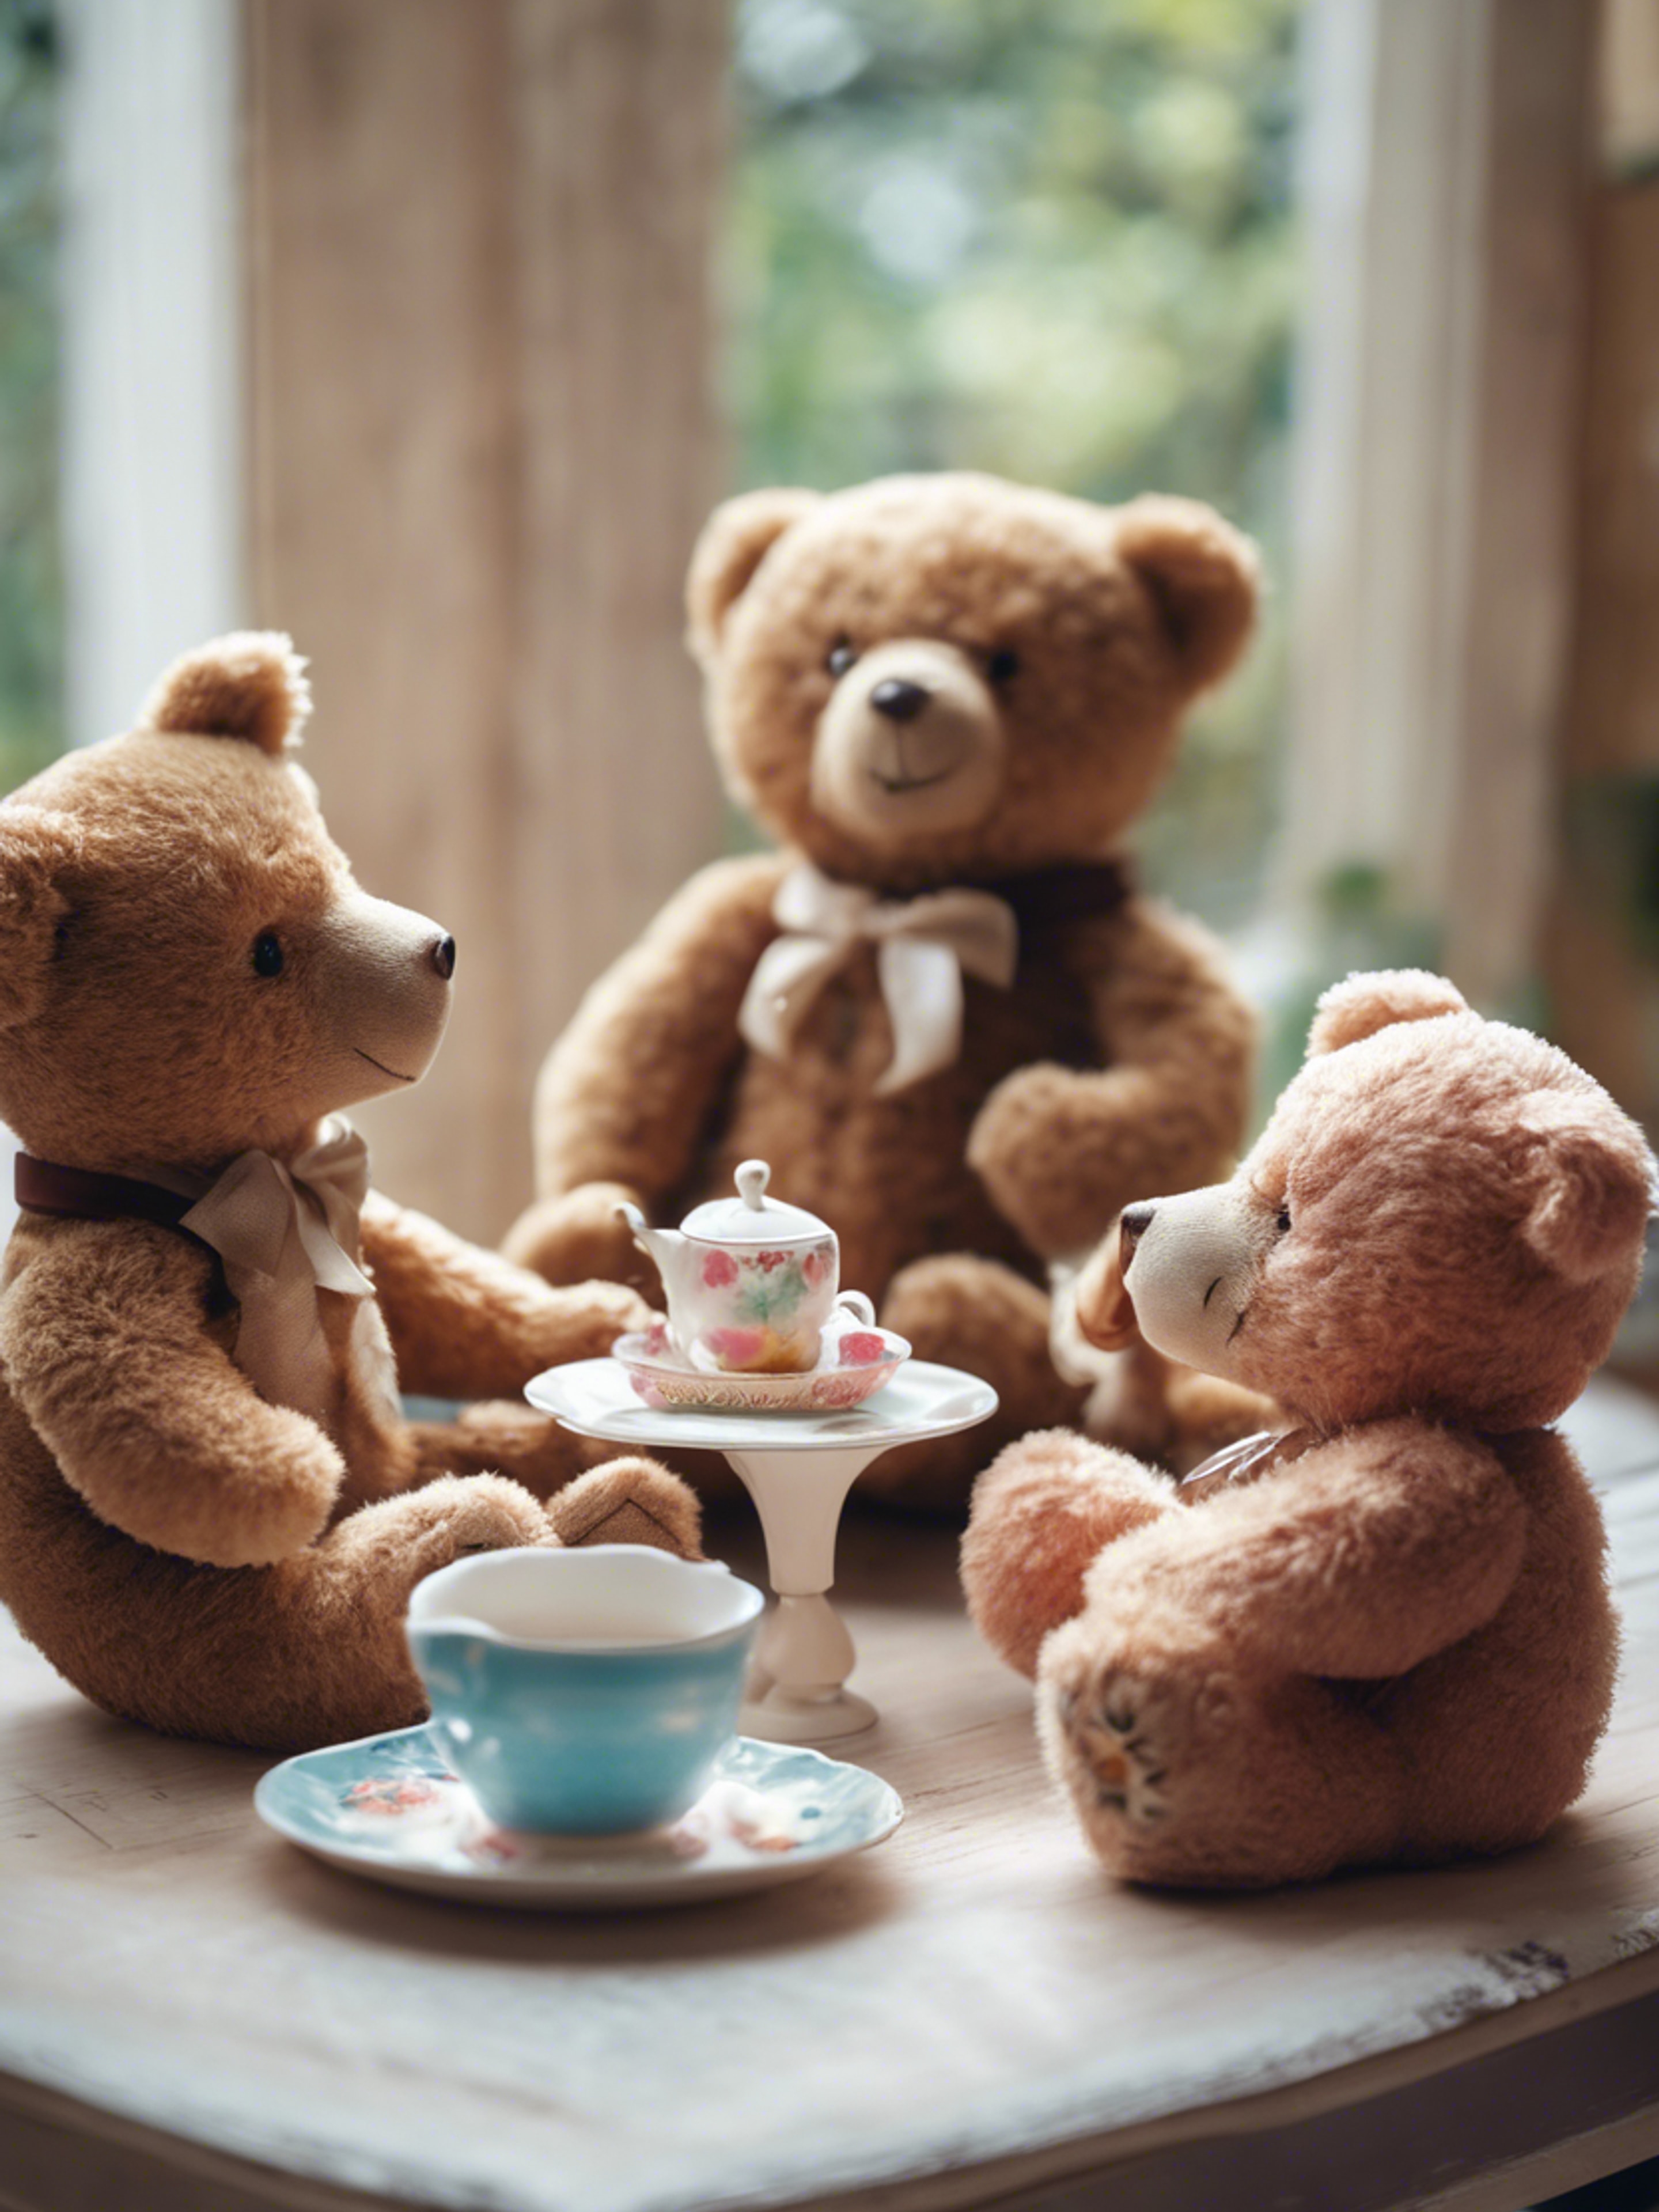 A group of teddy bears having a playful tea party in a child's room. Kertas dinding[5c3b9dbbb3984ccebf50]